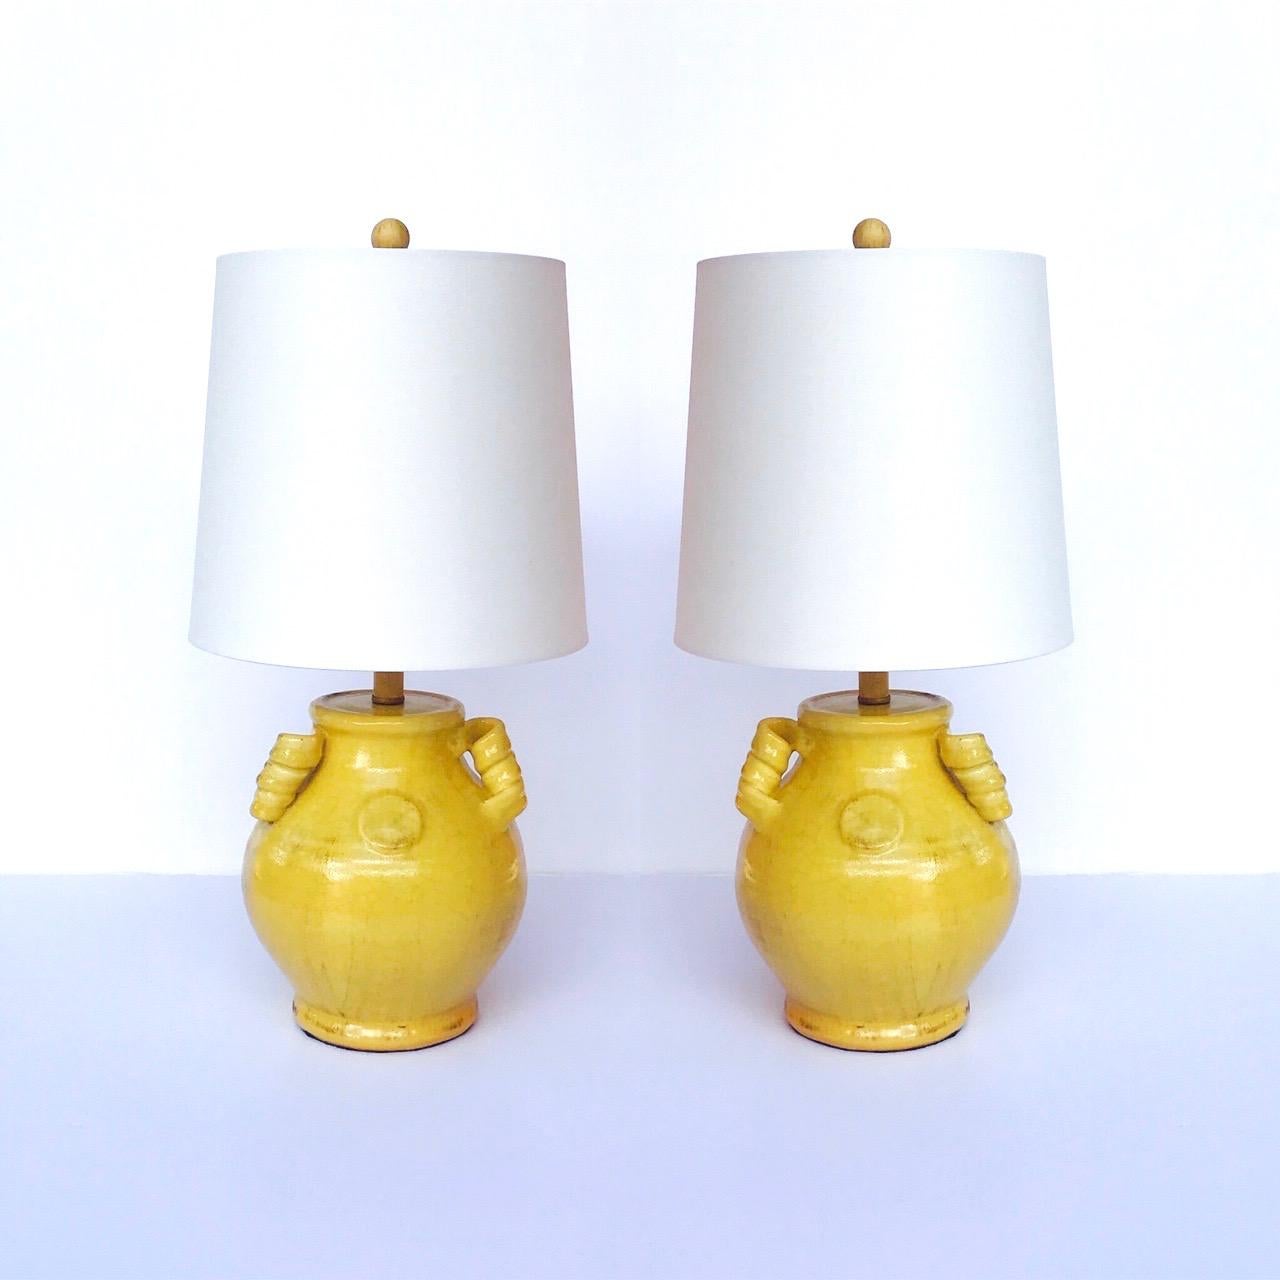 Chinoiserie Pair of Vintage Chinese Pottery Lamps with Antique Yellow Glaze, c. 1980's